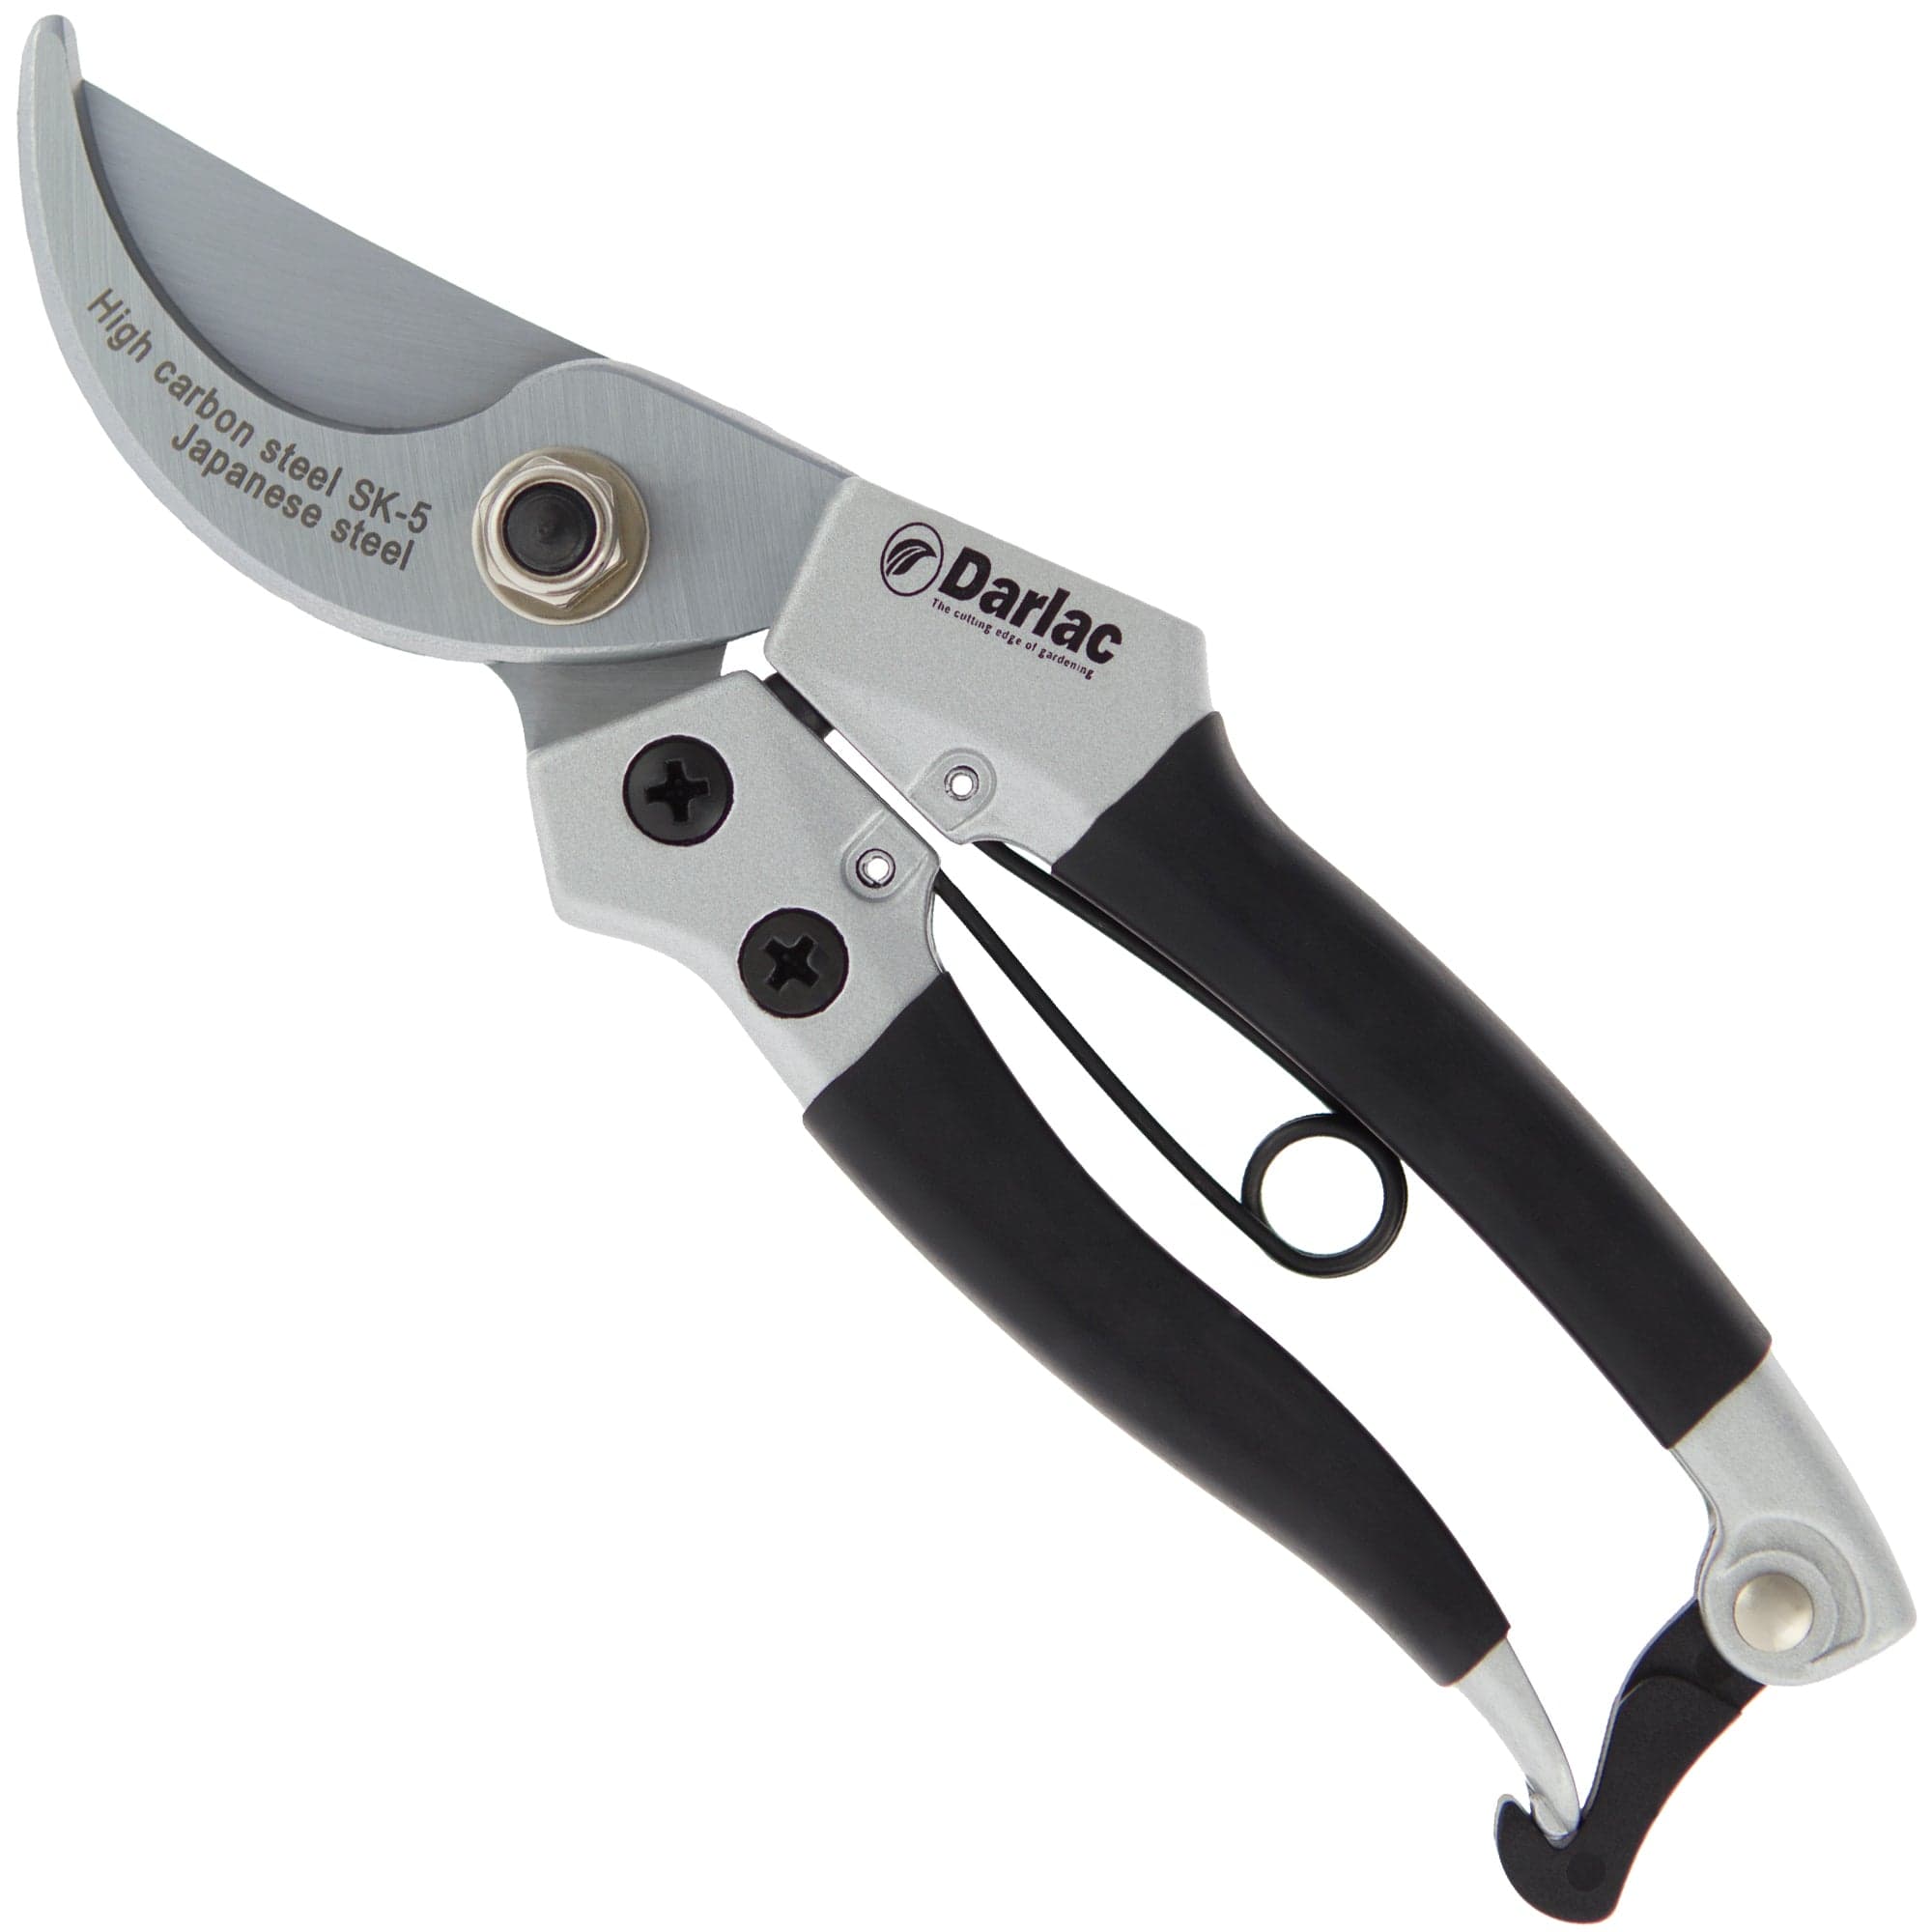 dt-brown HARDWARE Darlac Compact Plus Secateurs